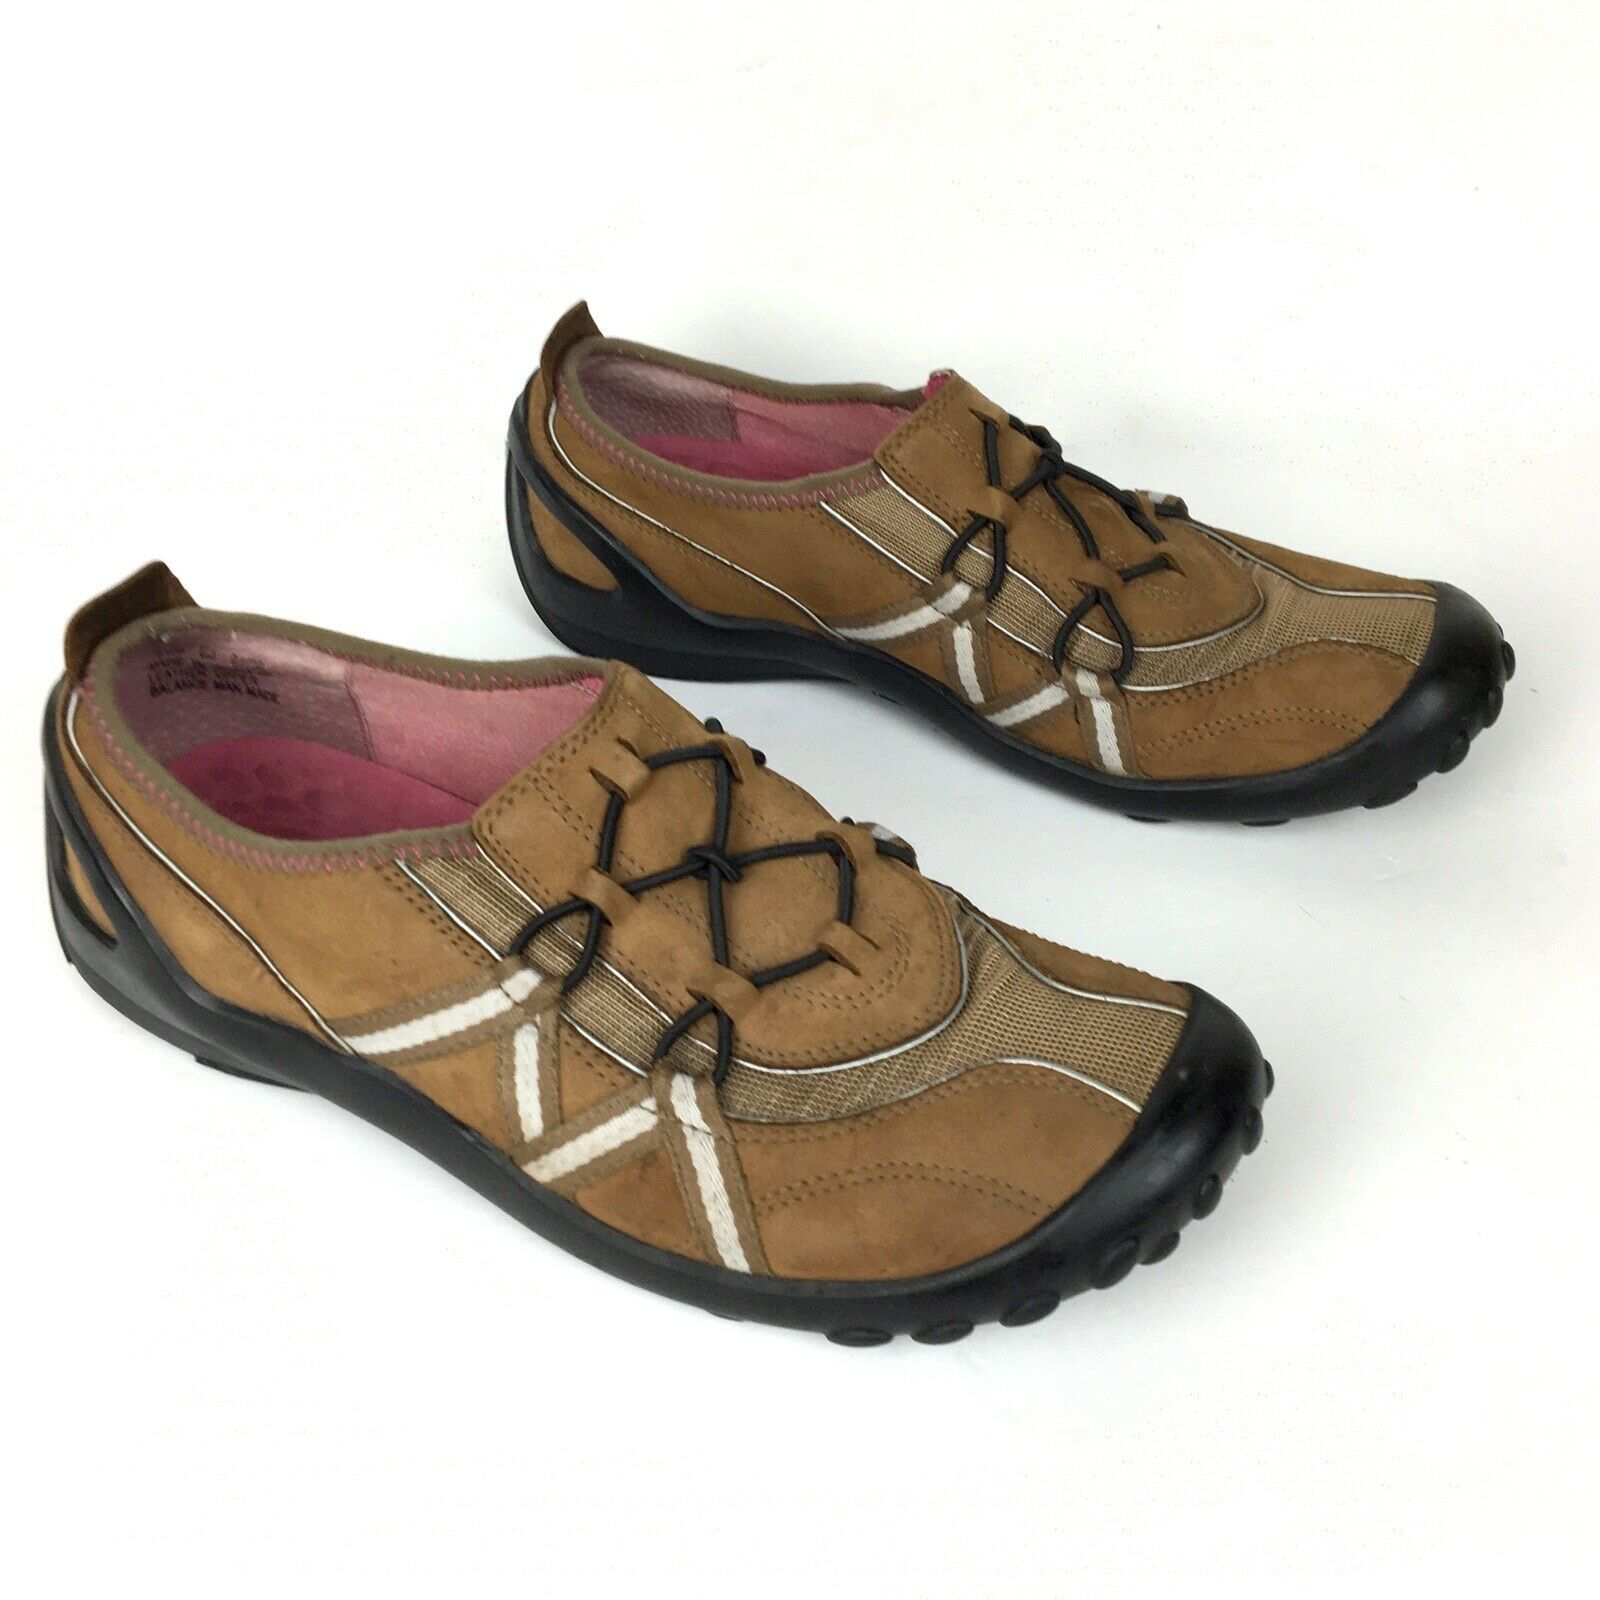 privo by clarks sandals